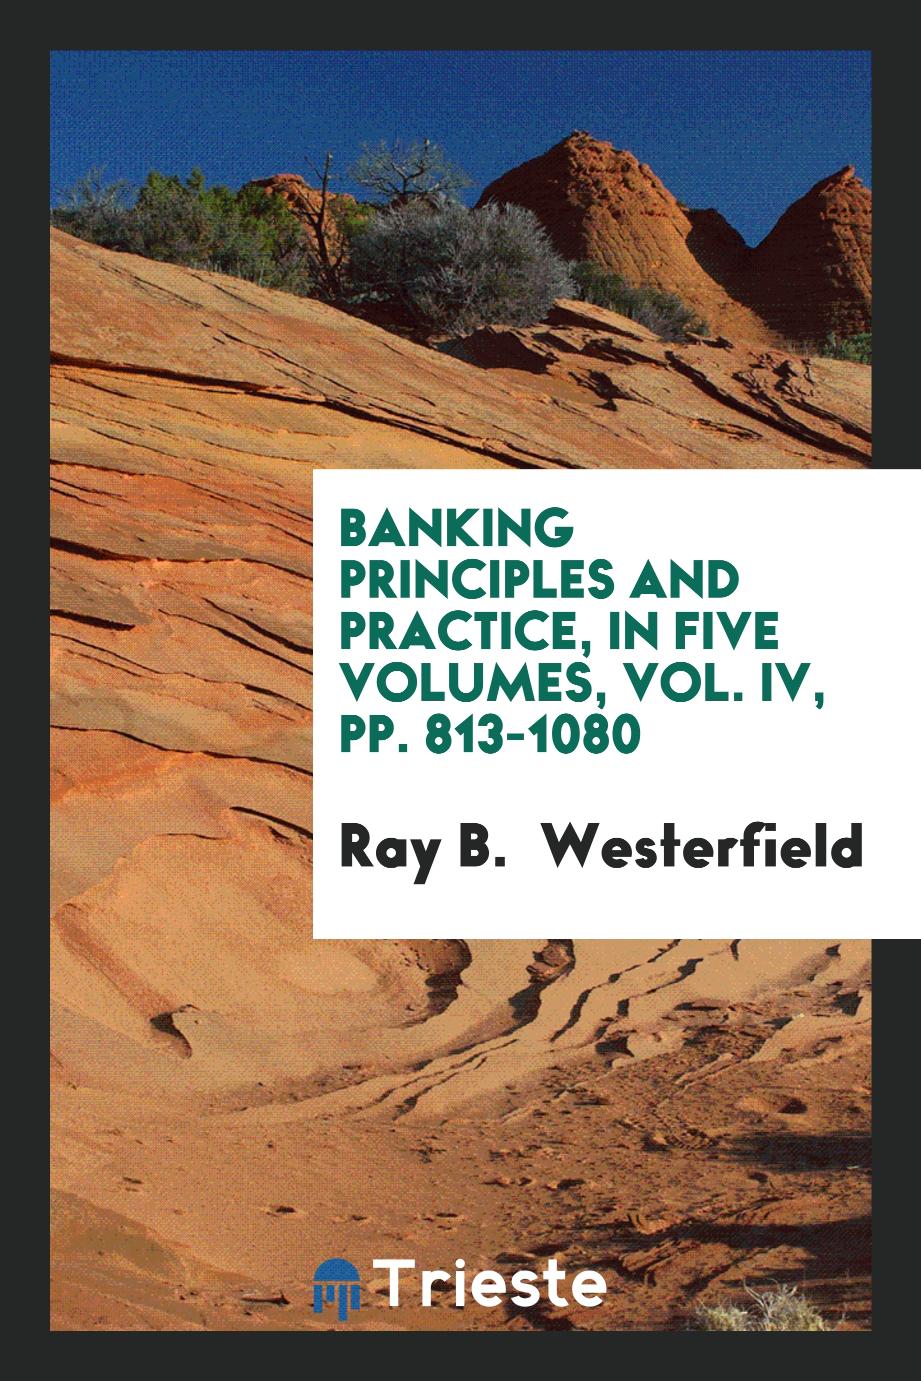 Banking principles and practice, in five volumes, Vol. IV, pp. 813-1080